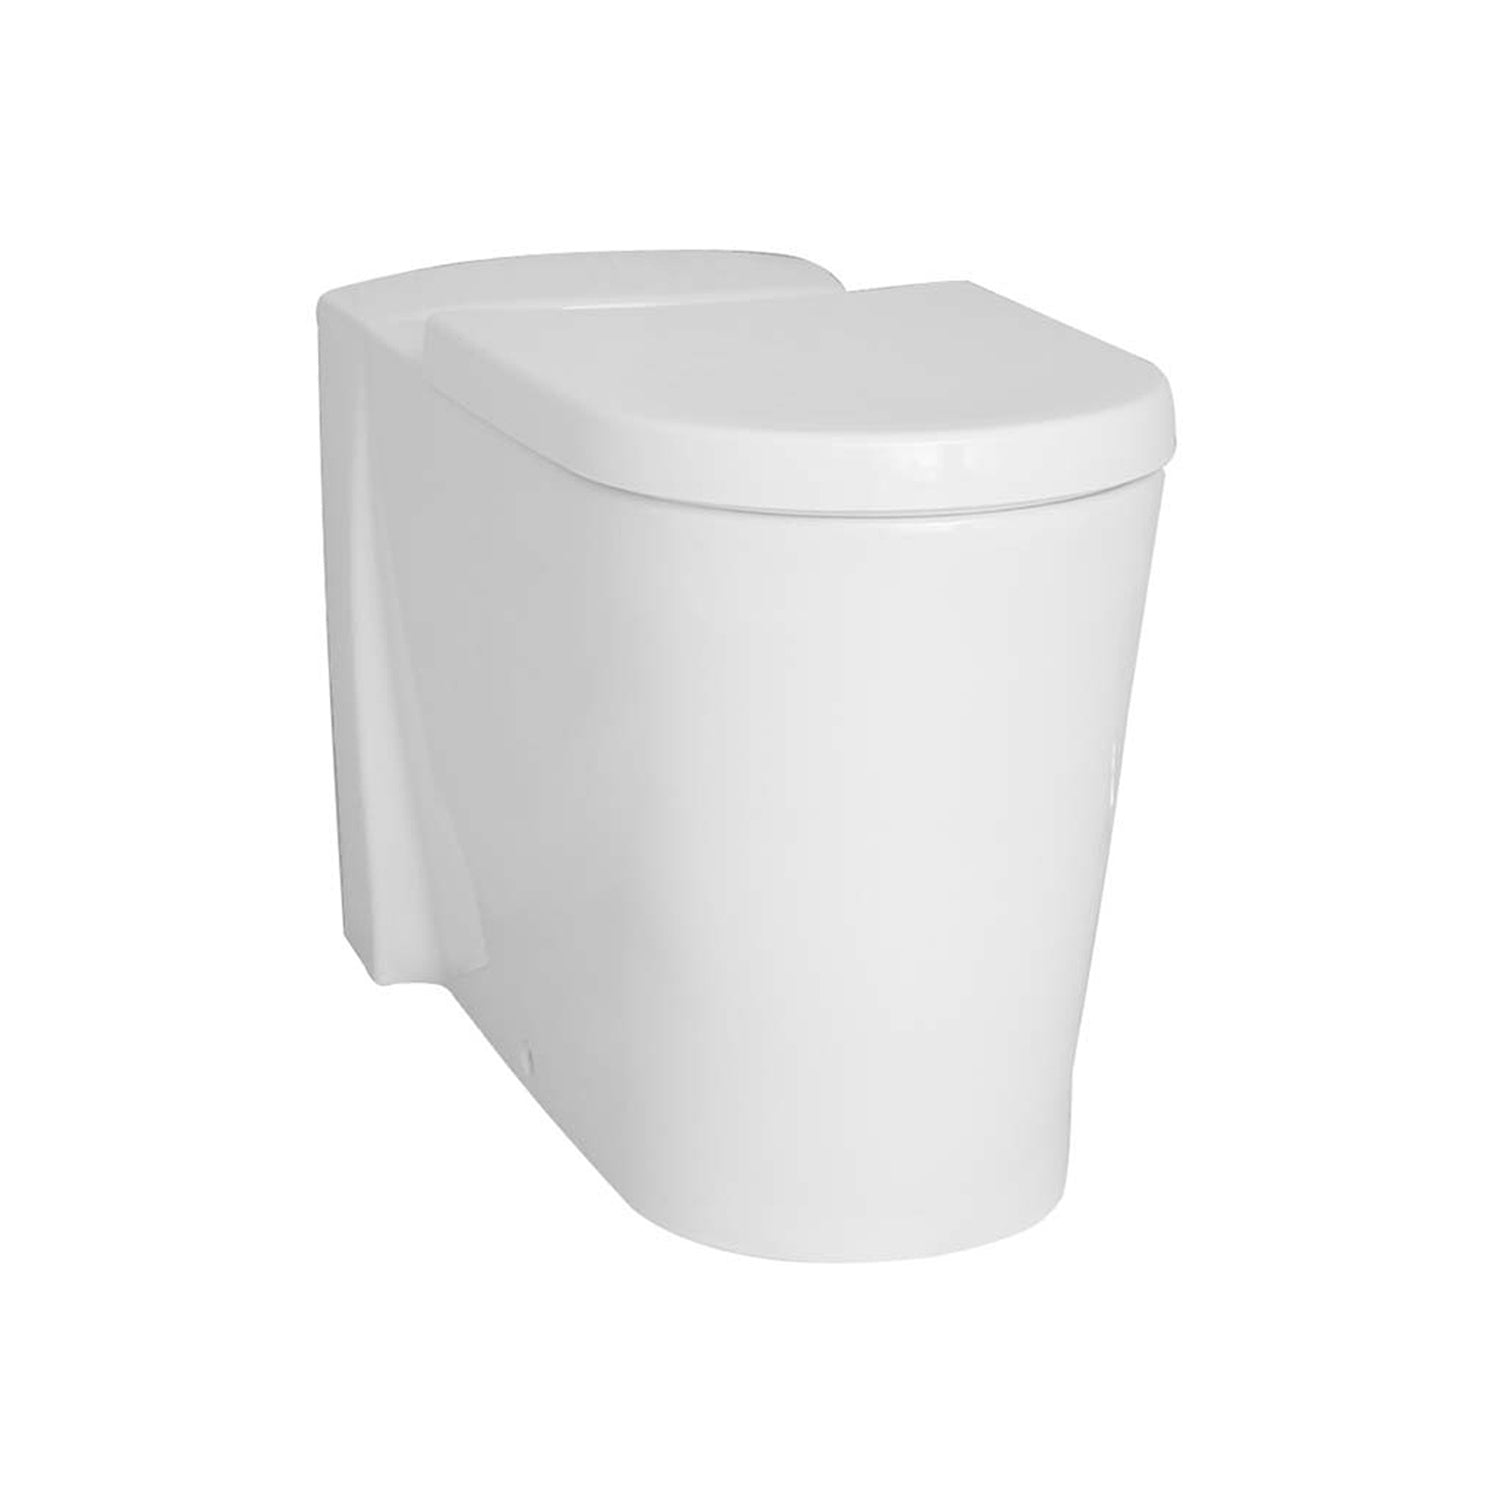 750mm Matrix Long Projection Back to Wall Toilet with a seat and cover on a white background